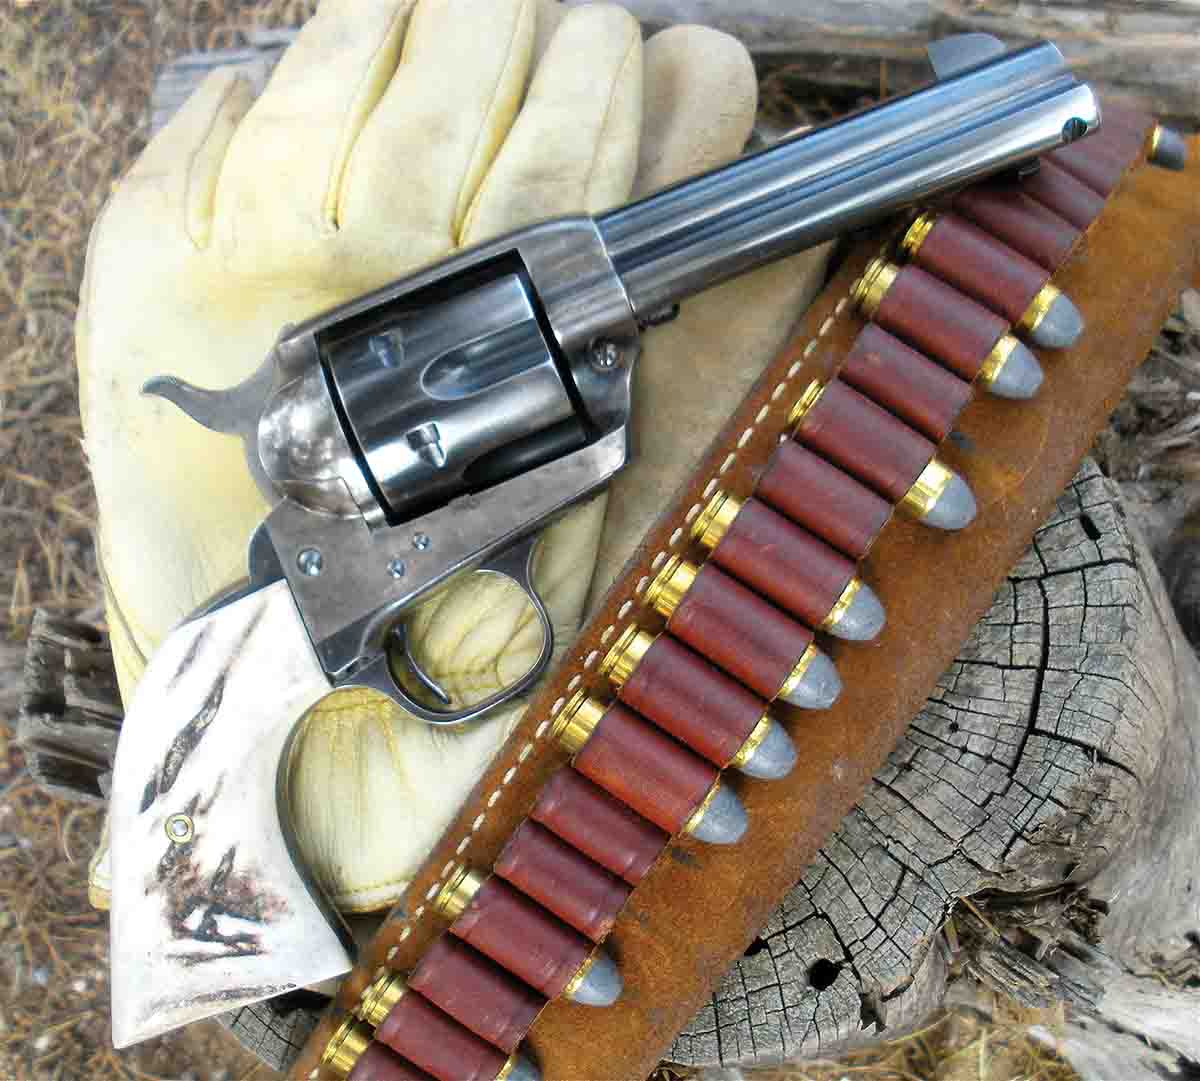 The Remington 250-grain RNFP bullet has been the standard in the .45 Colt for more than 140 years.